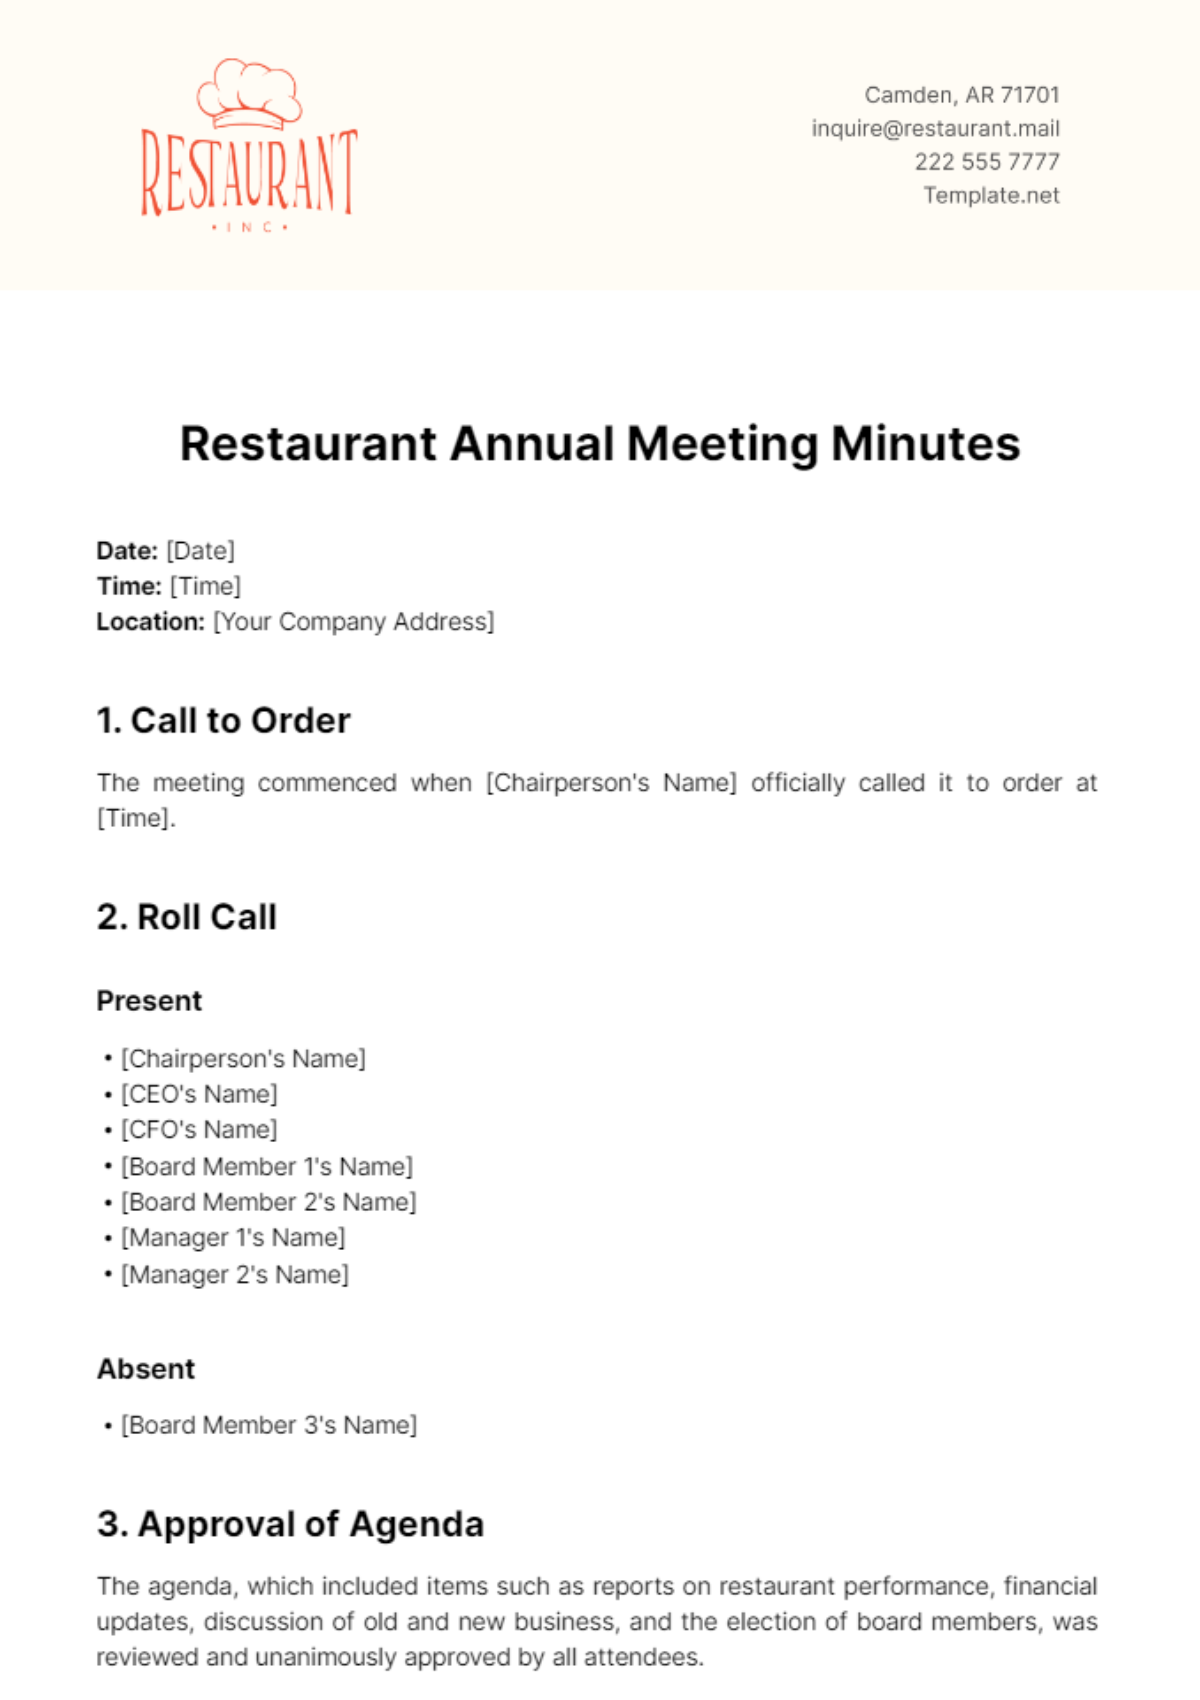 Free Restaurant Annual Meeting Minutes Template